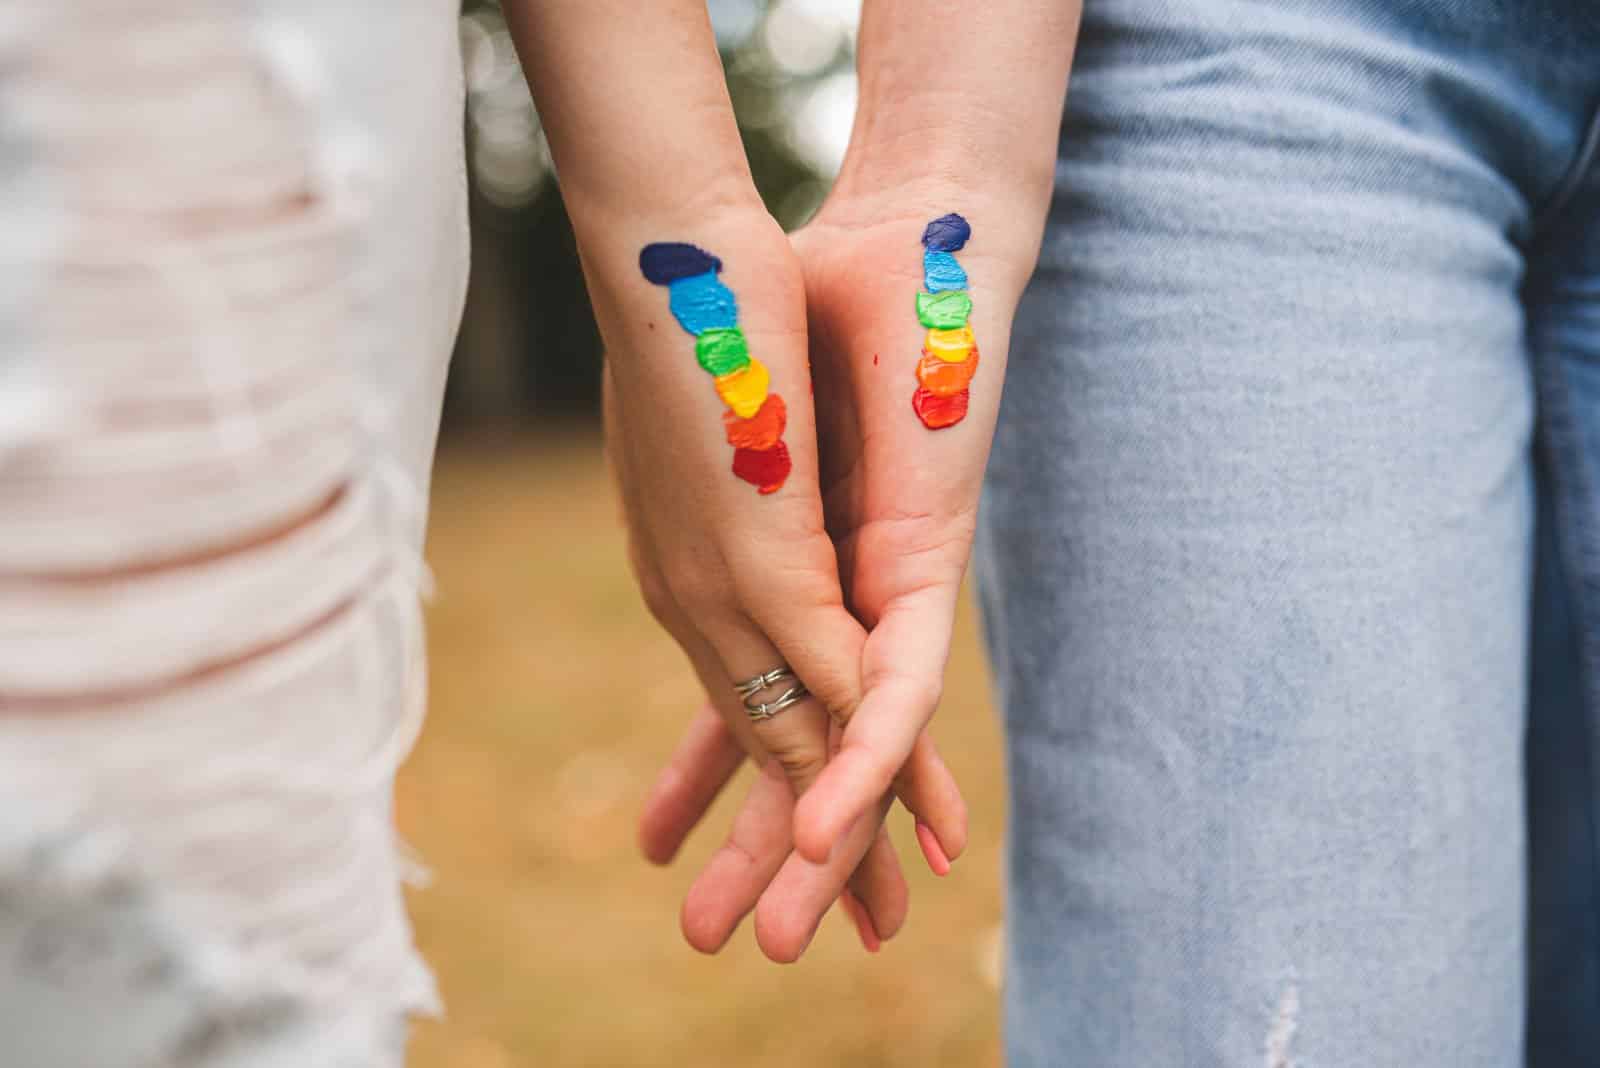 Image Credit: Shutterstock / Vera Moklyak <p><span>The Supreme Court’s decision in Obergefell v. Hodges legalized same-sex marriage nationwide, extending marriage equality to LGBTQ+ couples and advancing the rights of women in same-sex partnerships and families.</span></p>